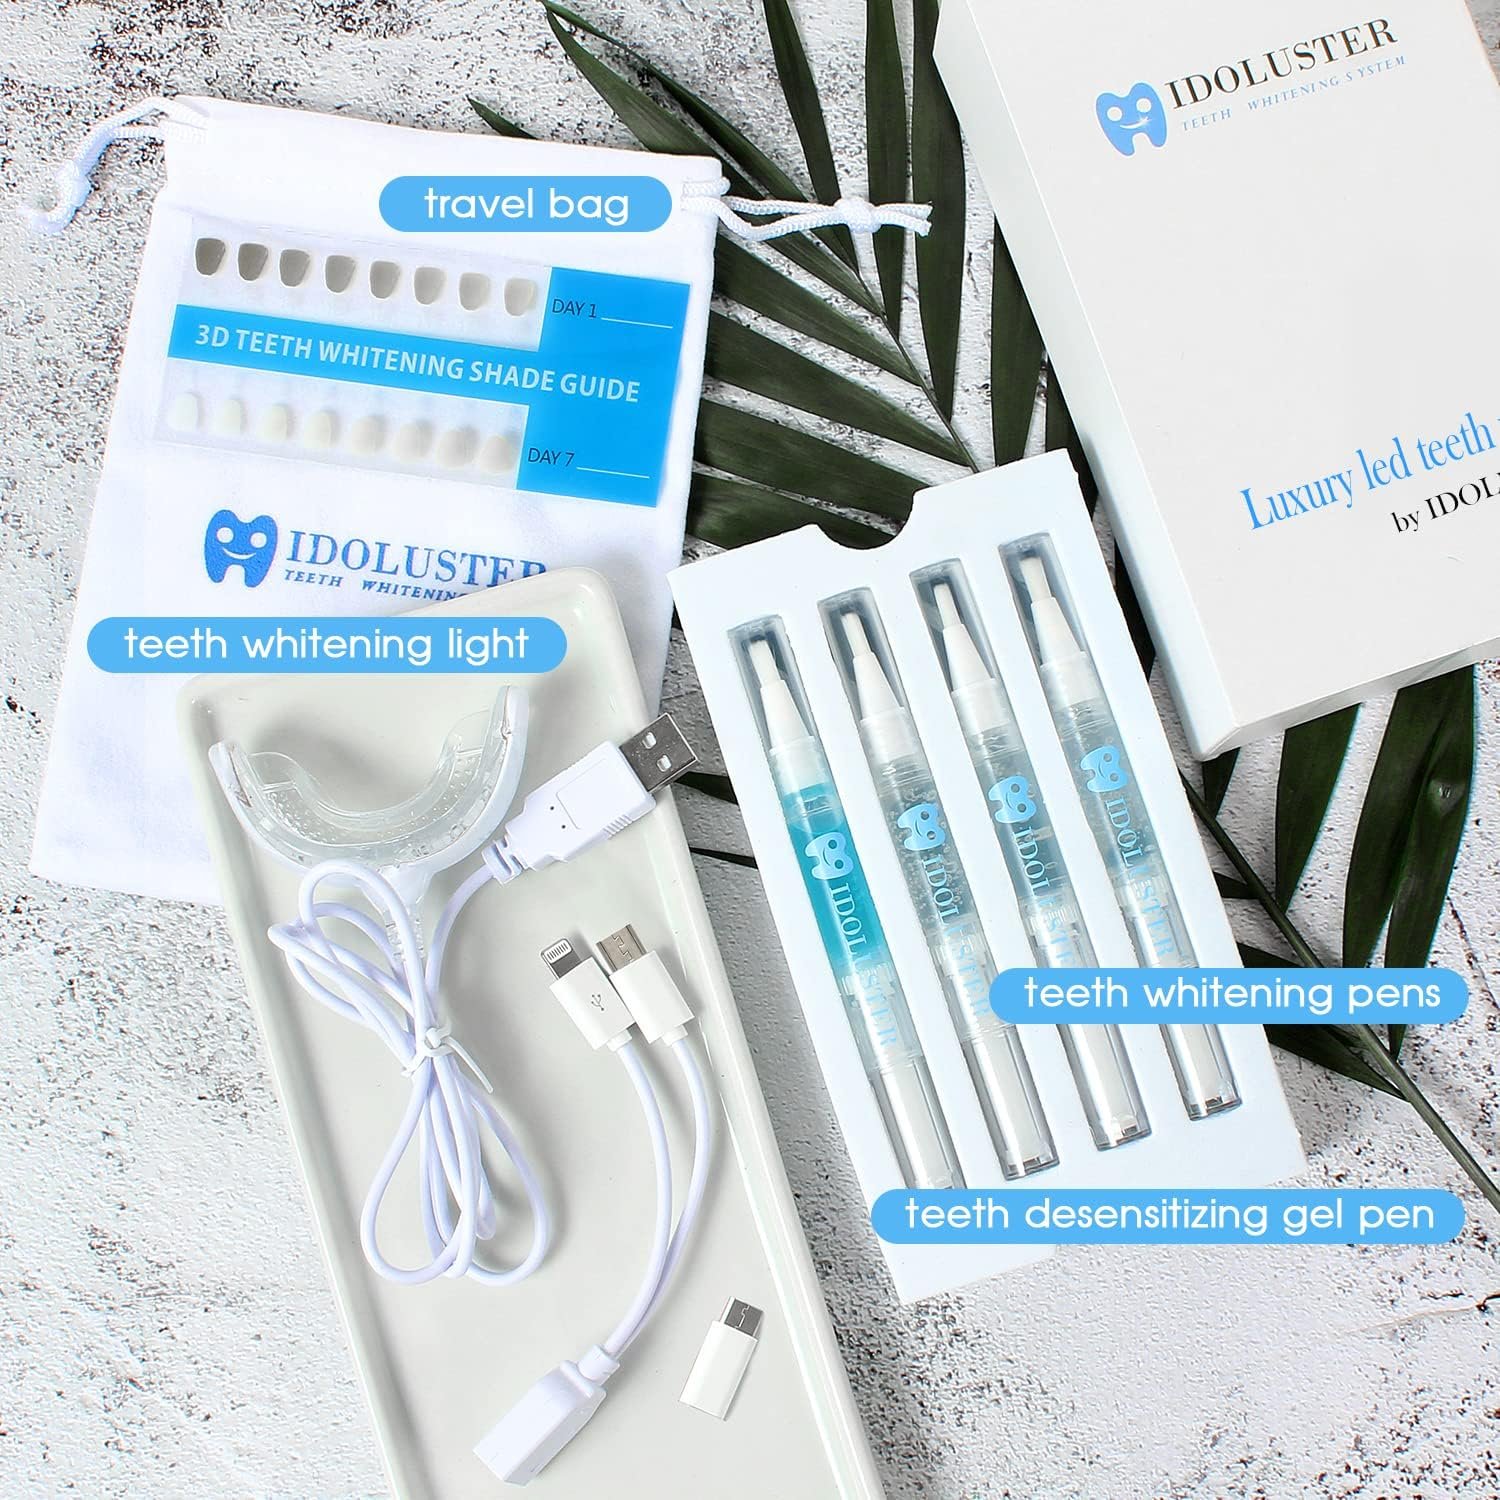 IDOLUSTER Teeth Whitening Kit with LED Light, Fast Tooth Whitener Gel  Red and Bule Teeth Whitening Light, 3 Pcs Teeth whitening pens, Desensitizing Gel, Teeth Whitening System for Sensitive Teeth